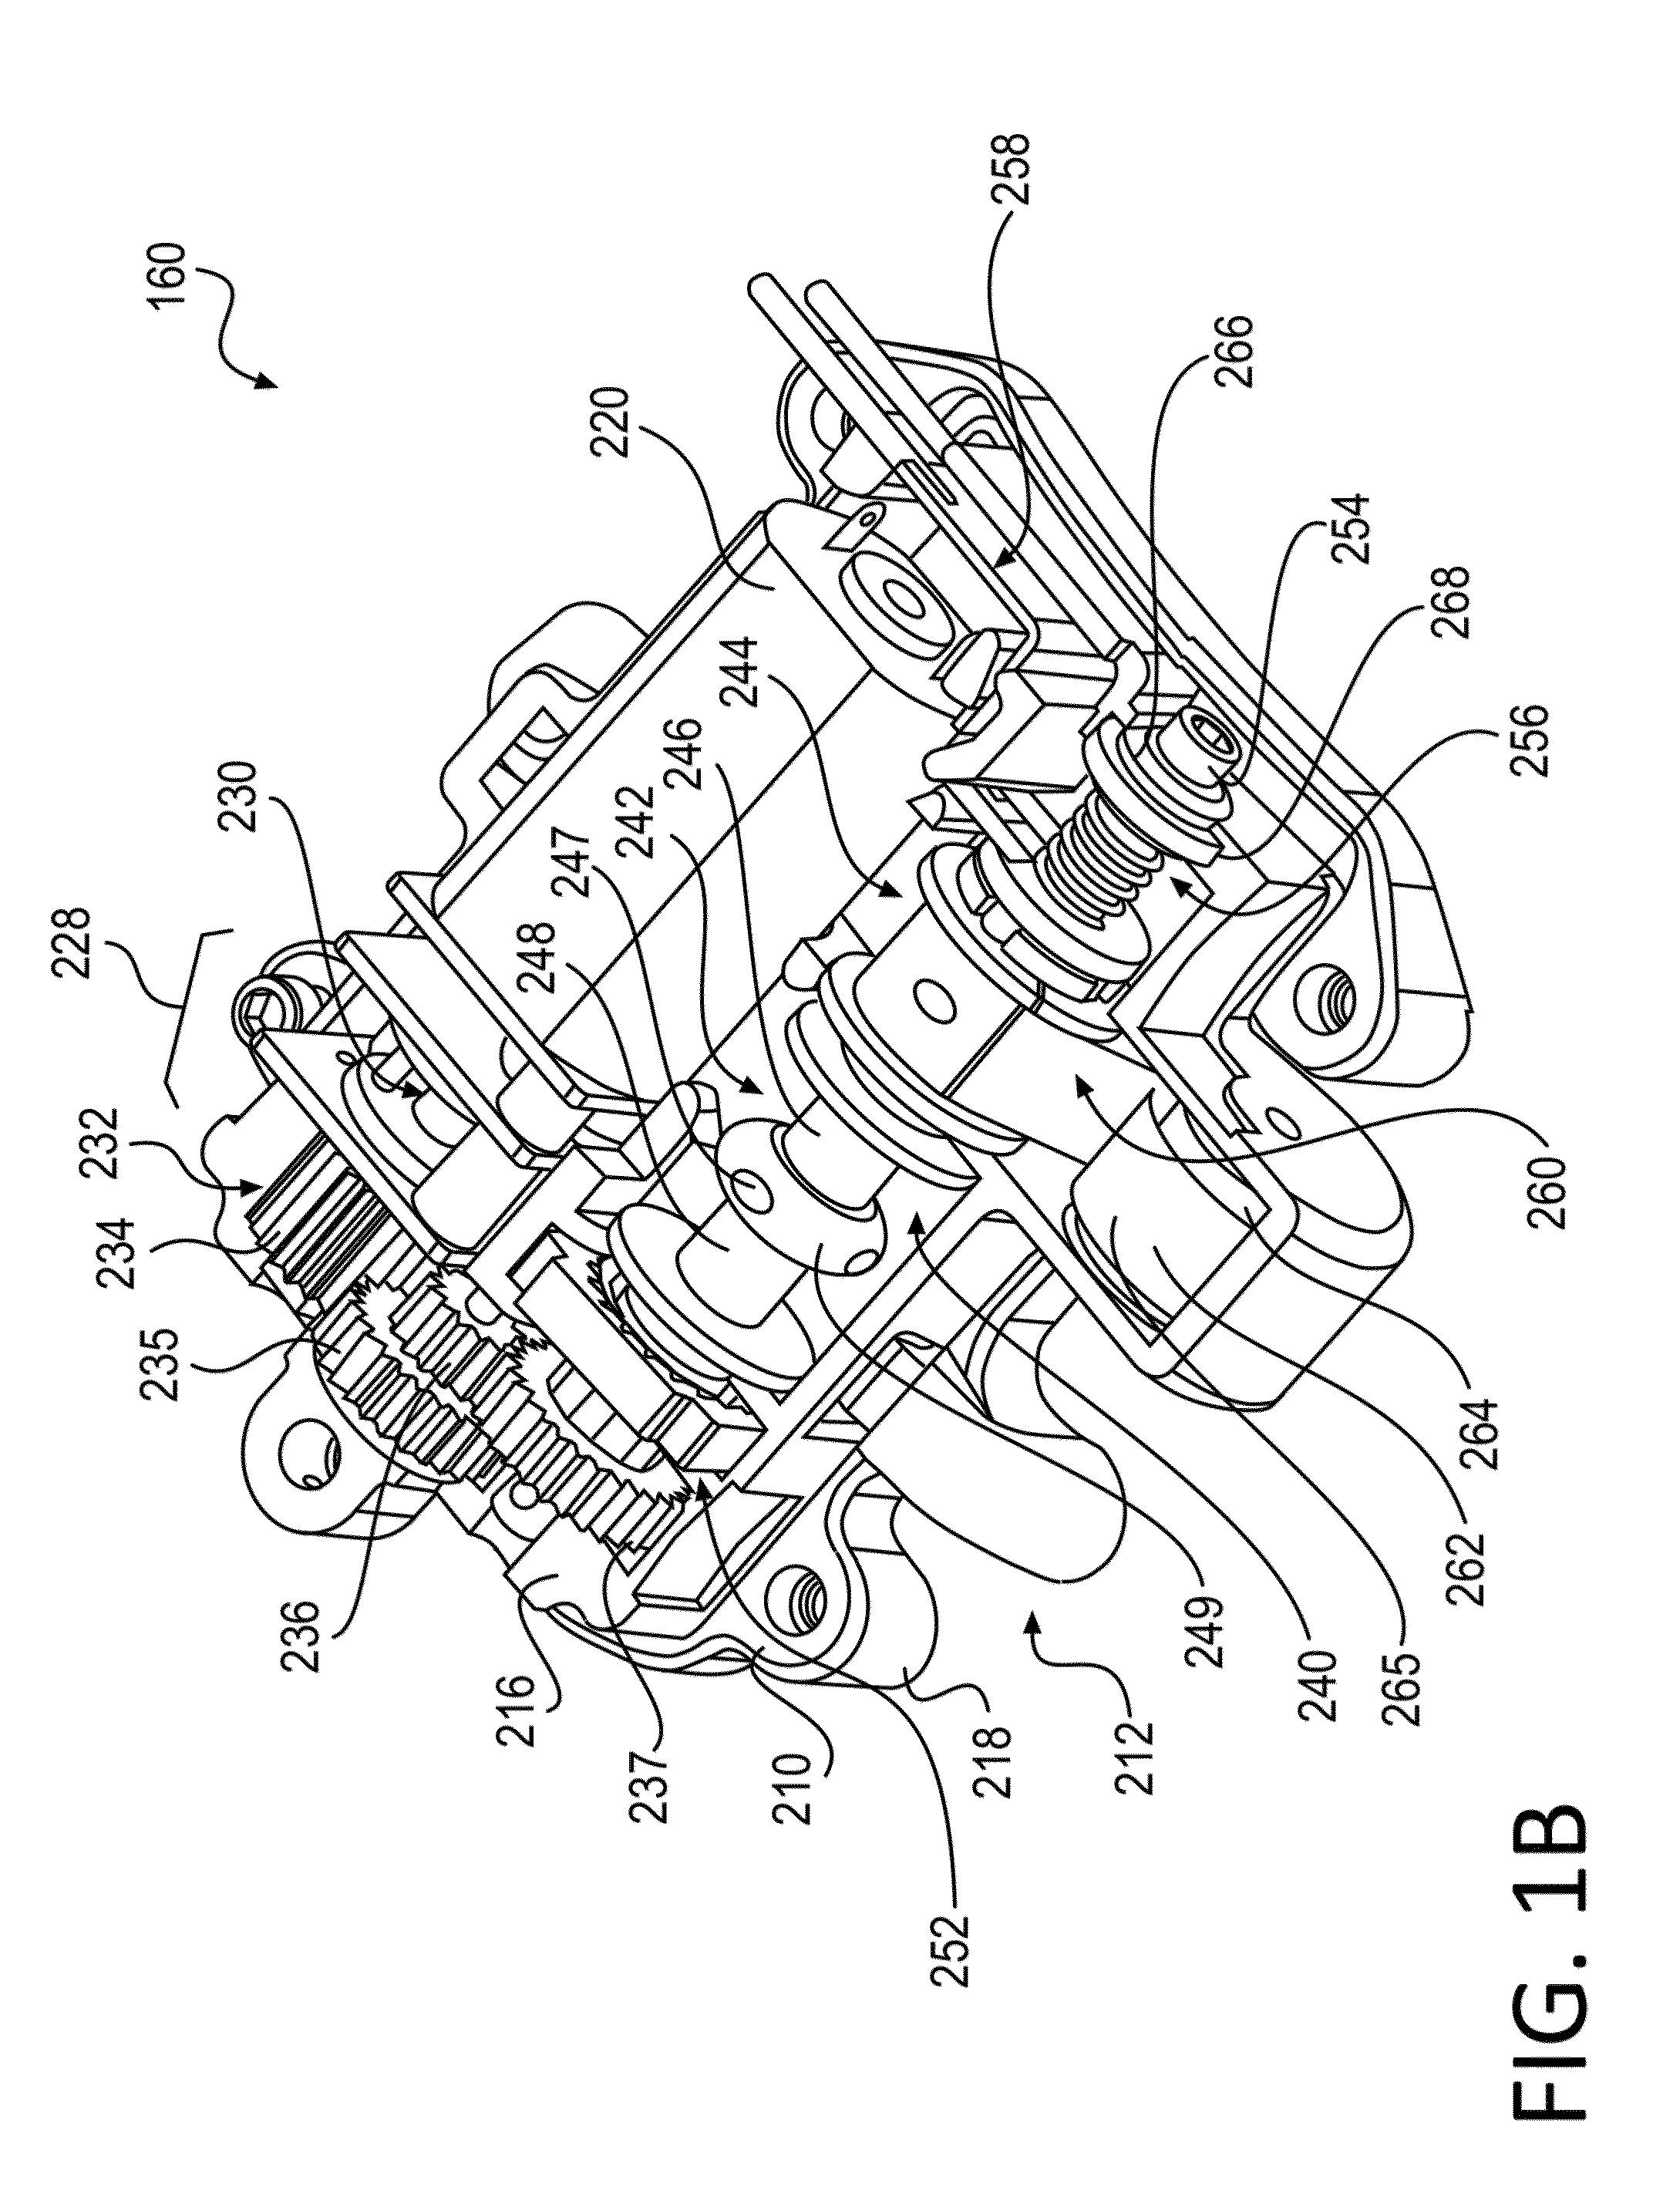 Systems, methods, and devices for automatic closure of medical devices